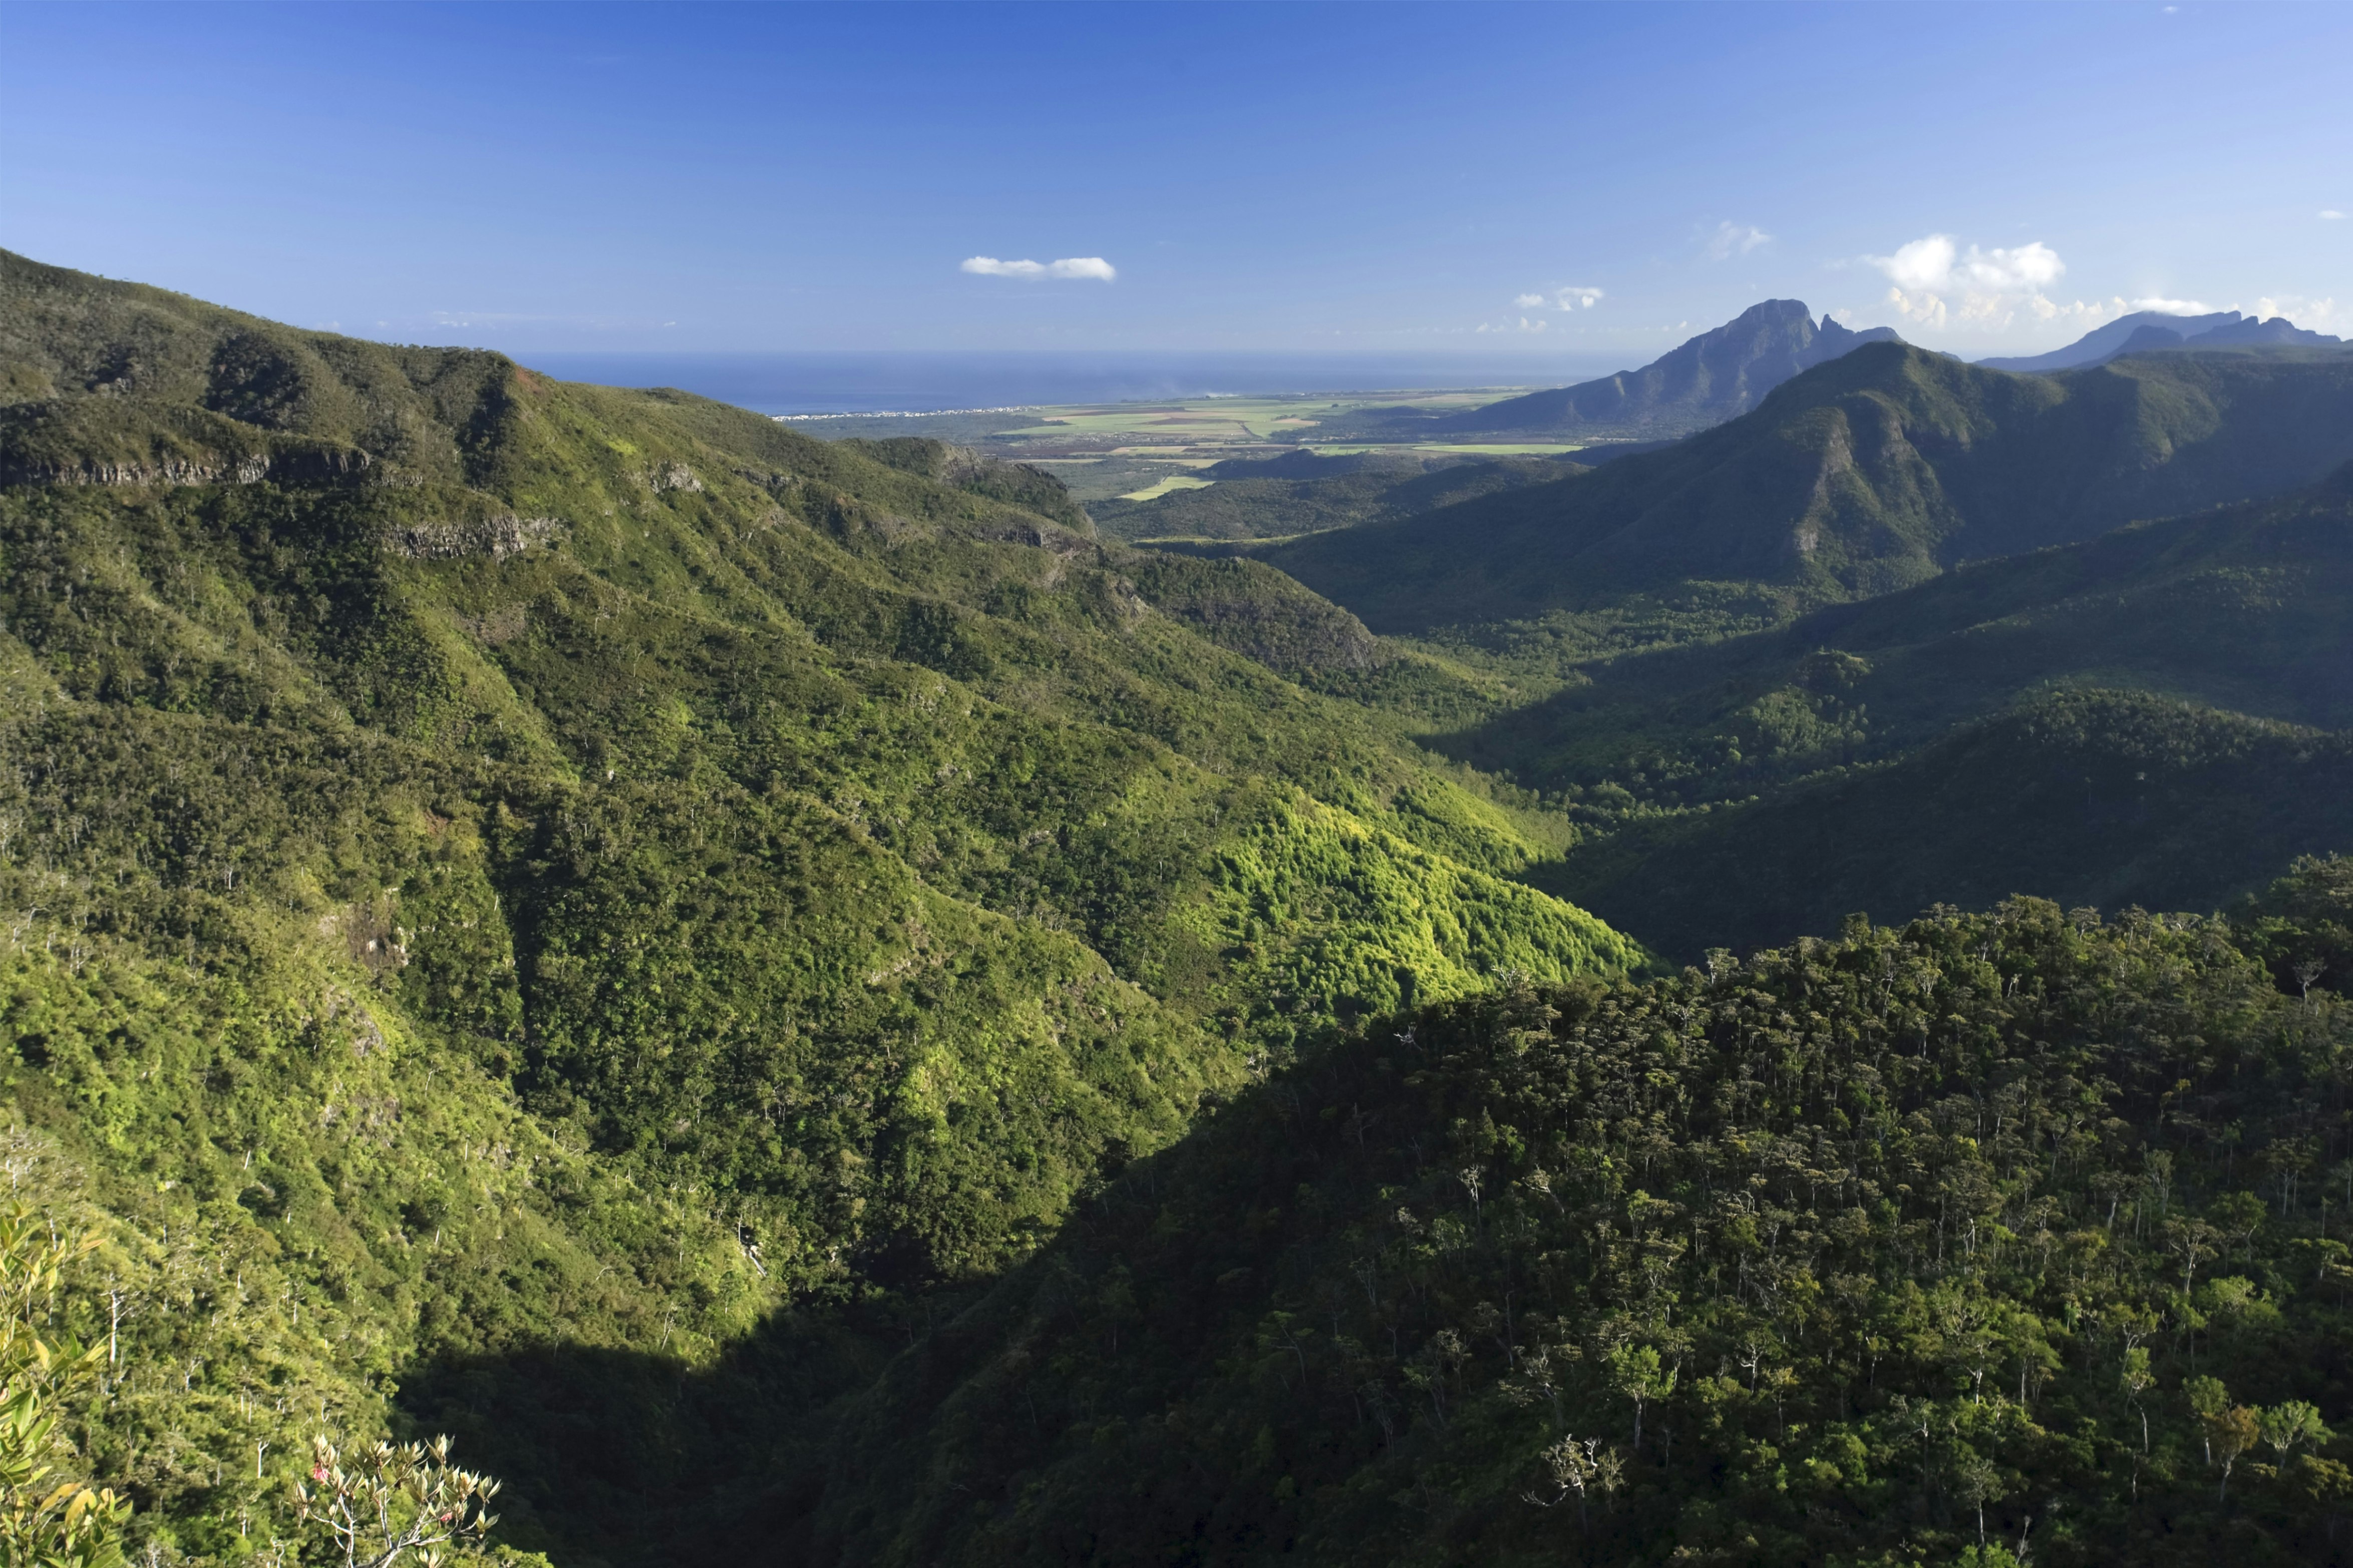 View of green hills at Black River Gorges National Park, Mauritius